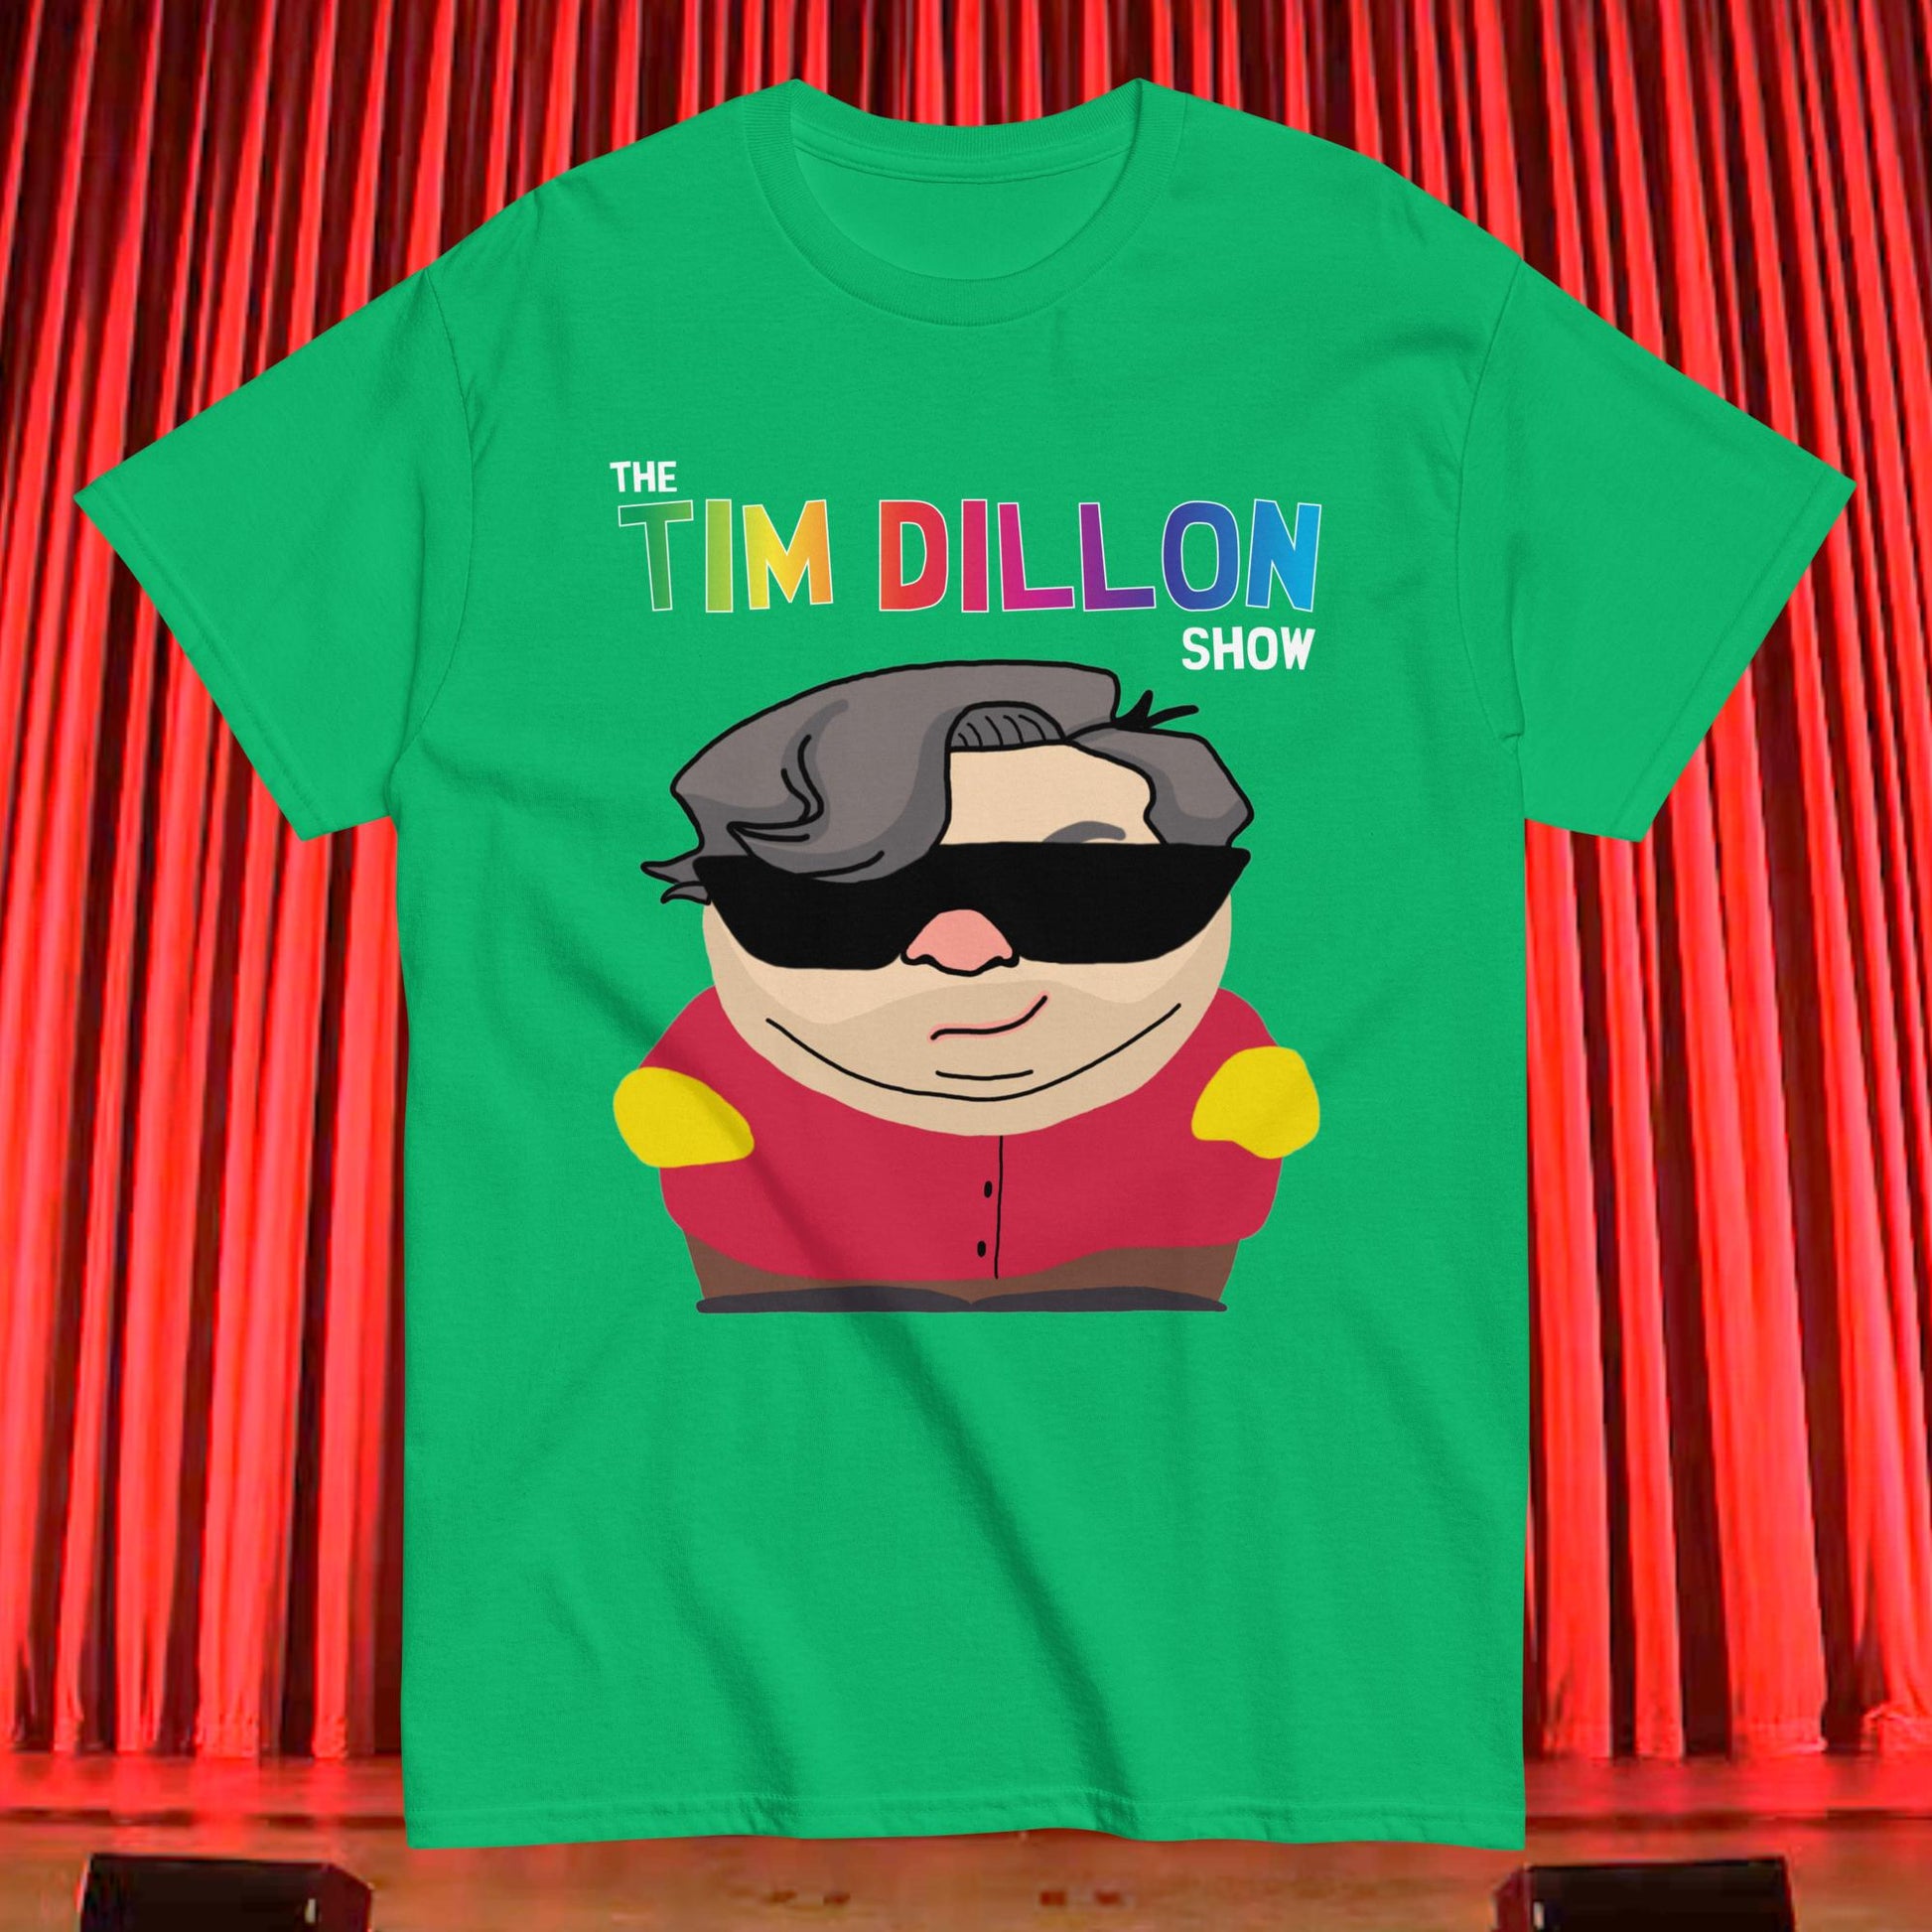 Tim Dillon Cartman, Southpark, The Tim Dillon Show, Tim Dillon Podcast, Tim Dillon Merch, Tim Dillon T-shirt Next Cult Brand Podcasts, Stand-up Comedy, Tim Dillon